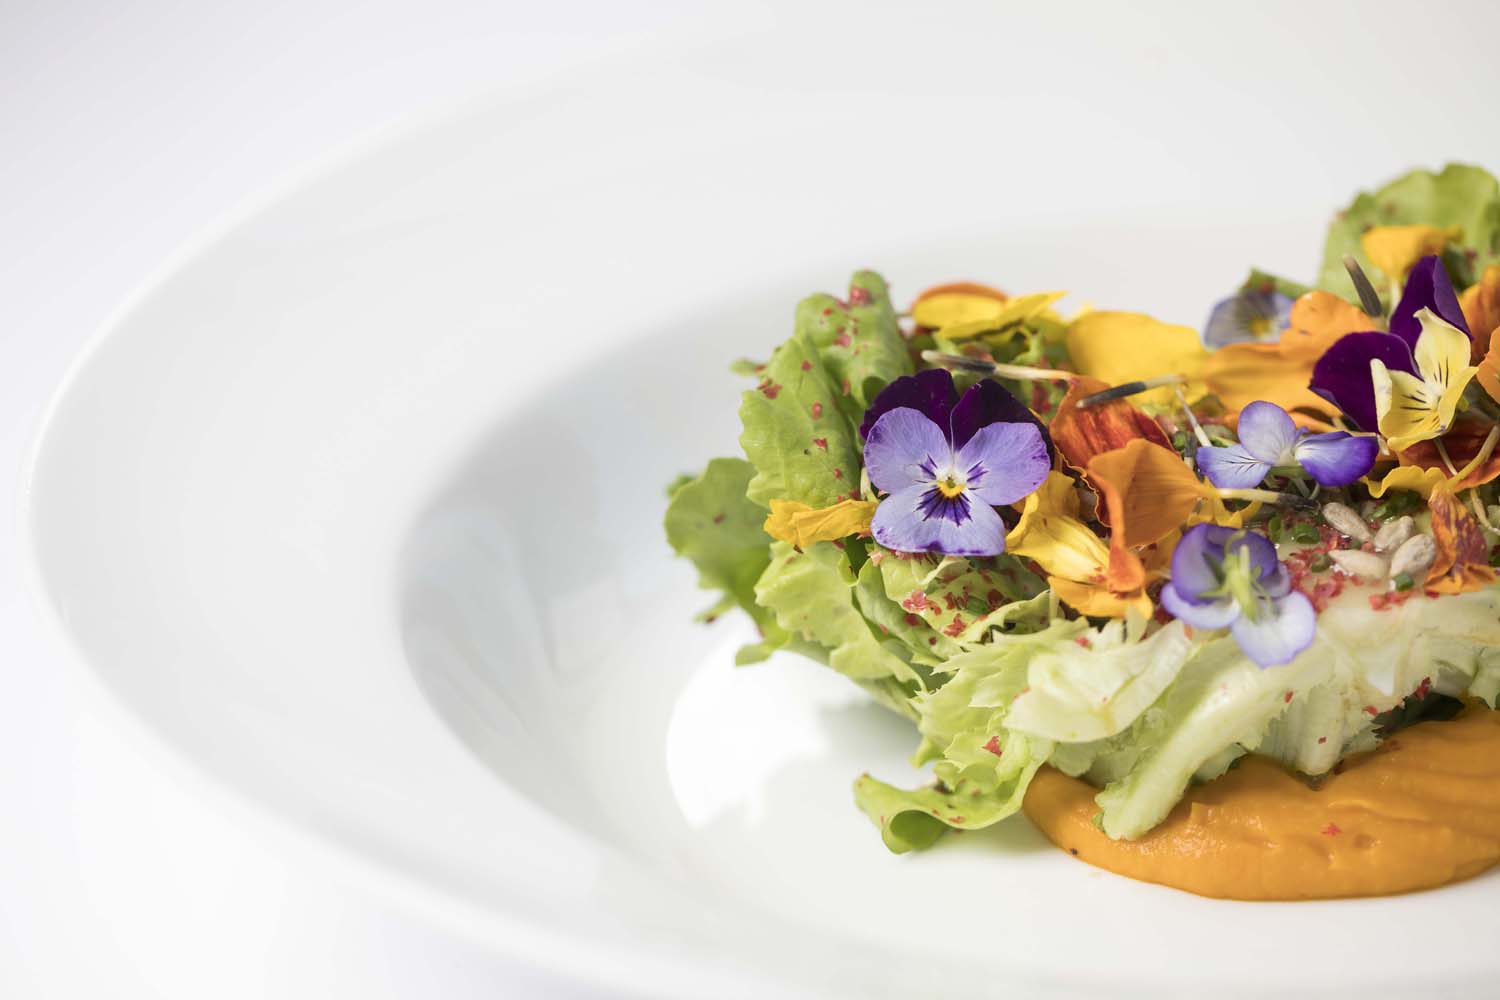 Main plated salad with flowers